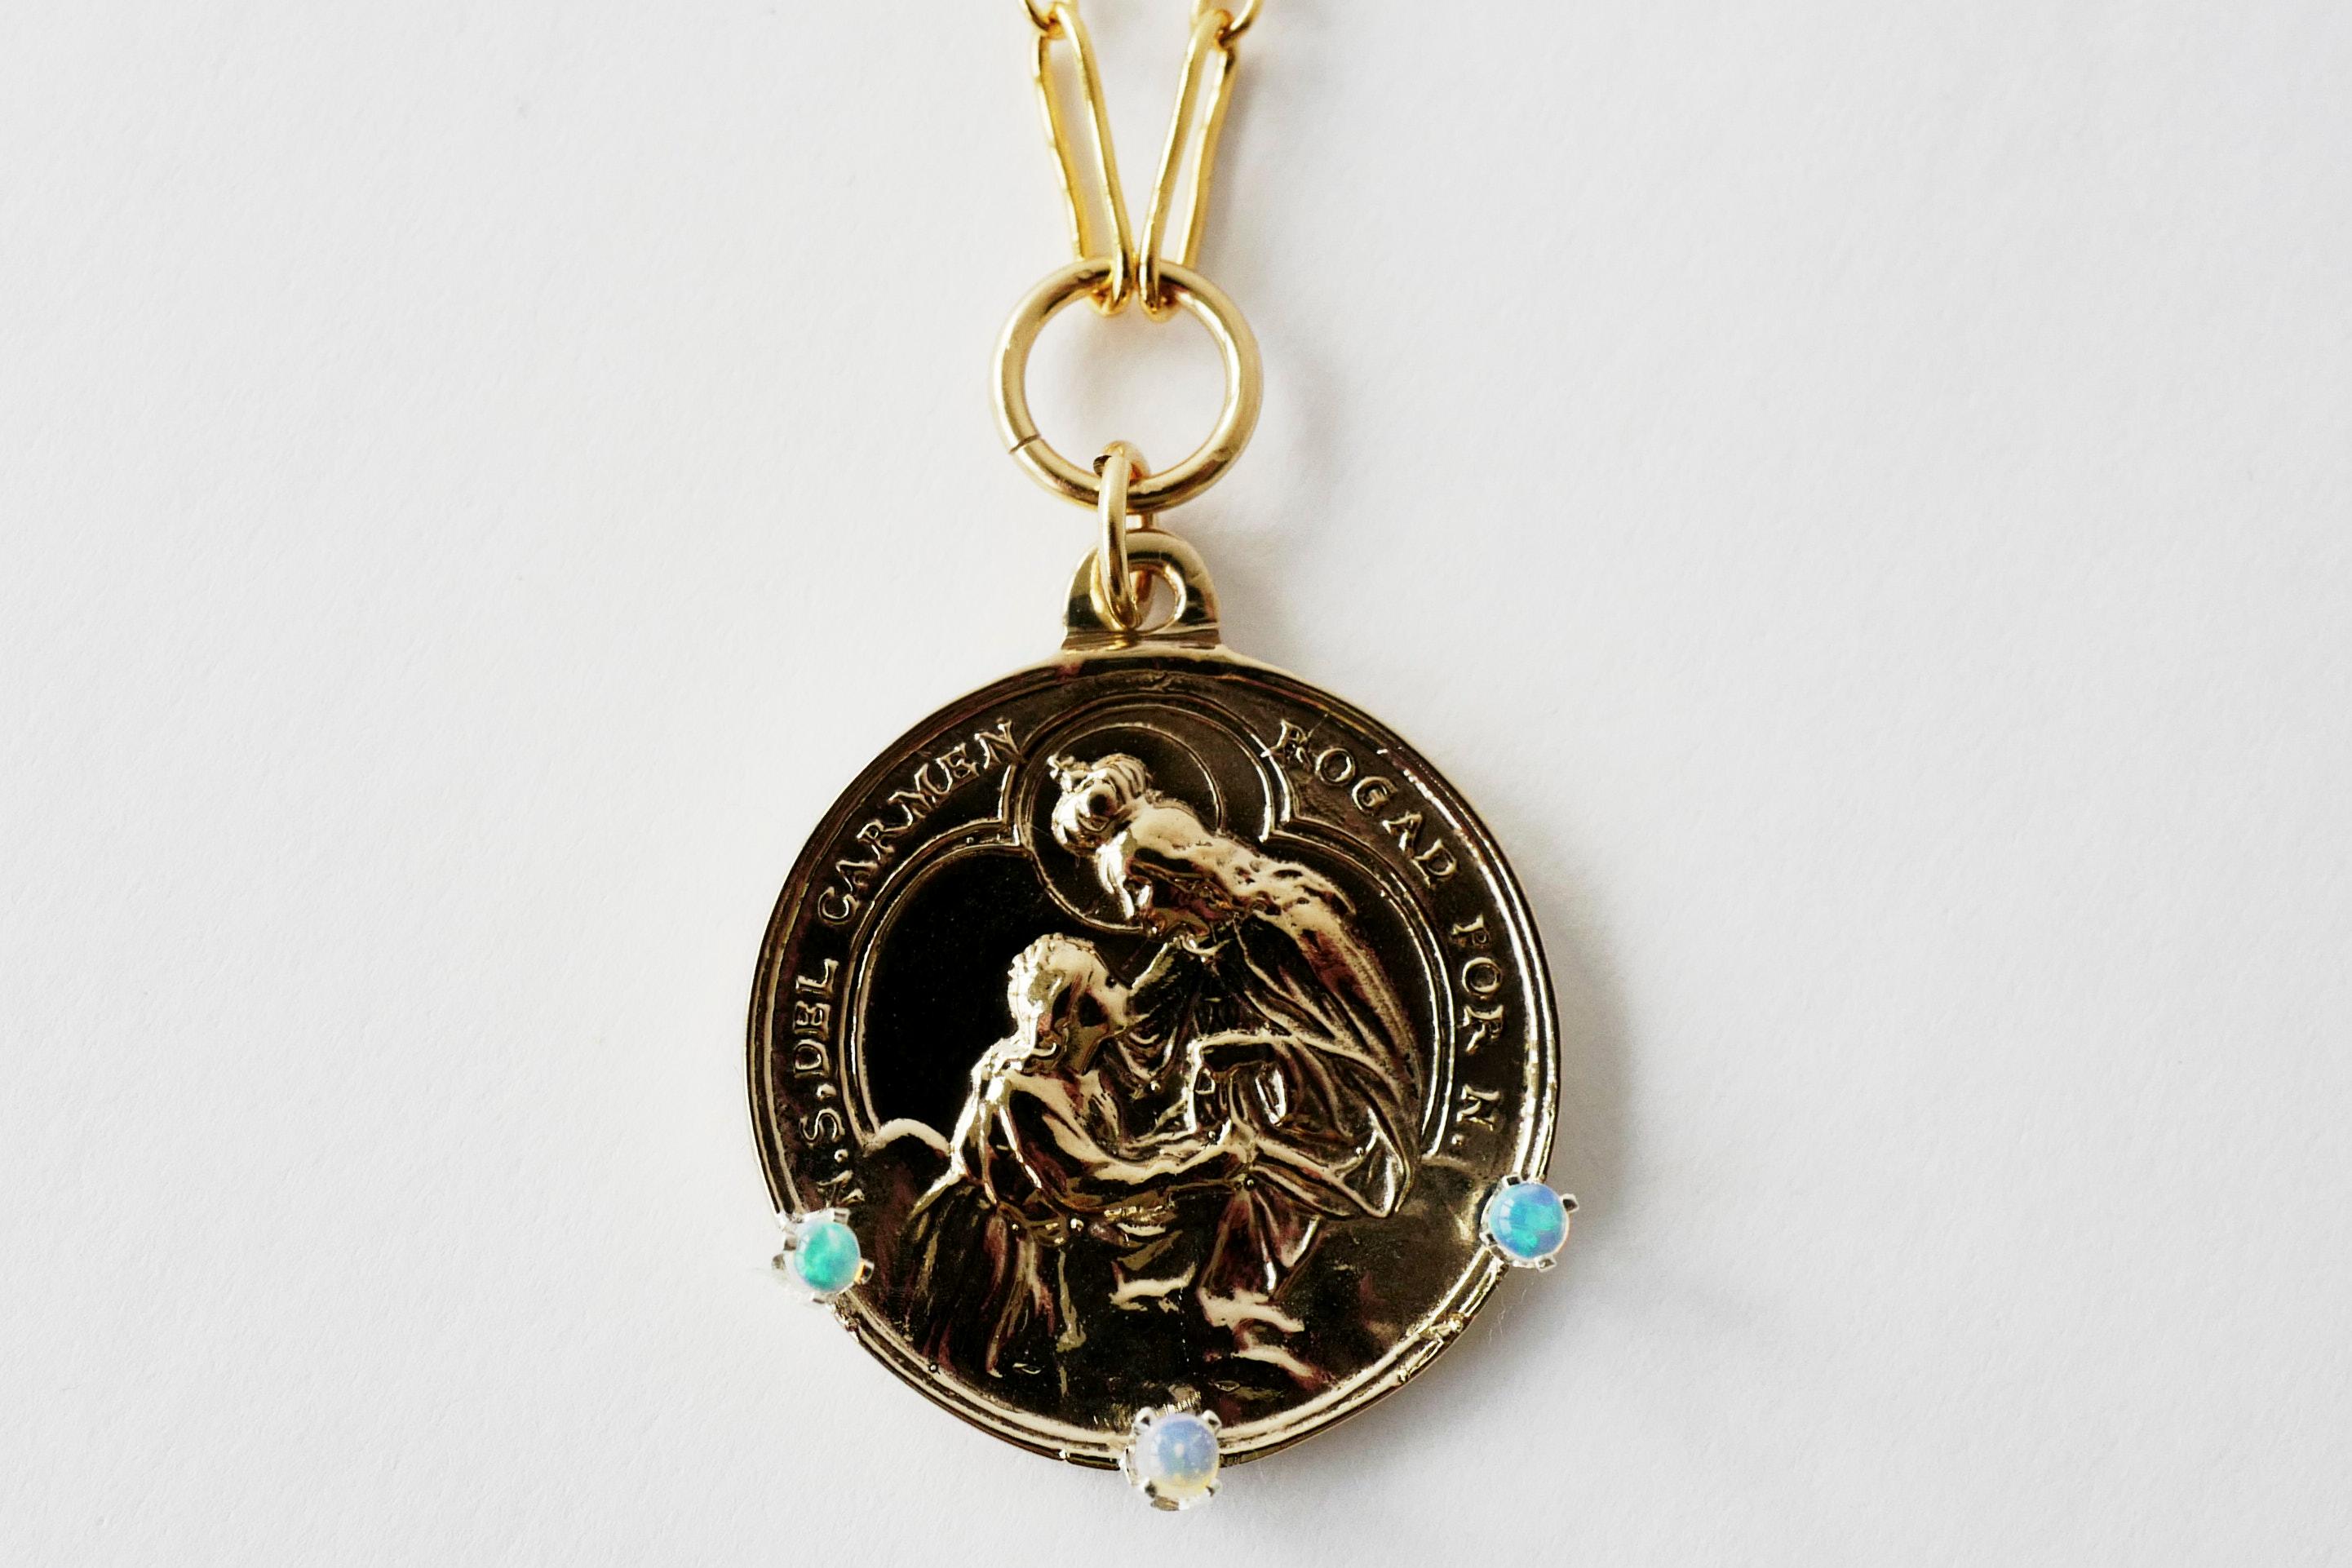 Virgin Mary Medal Chain Necklace Opal Pendant J Dauphin For Sale 2